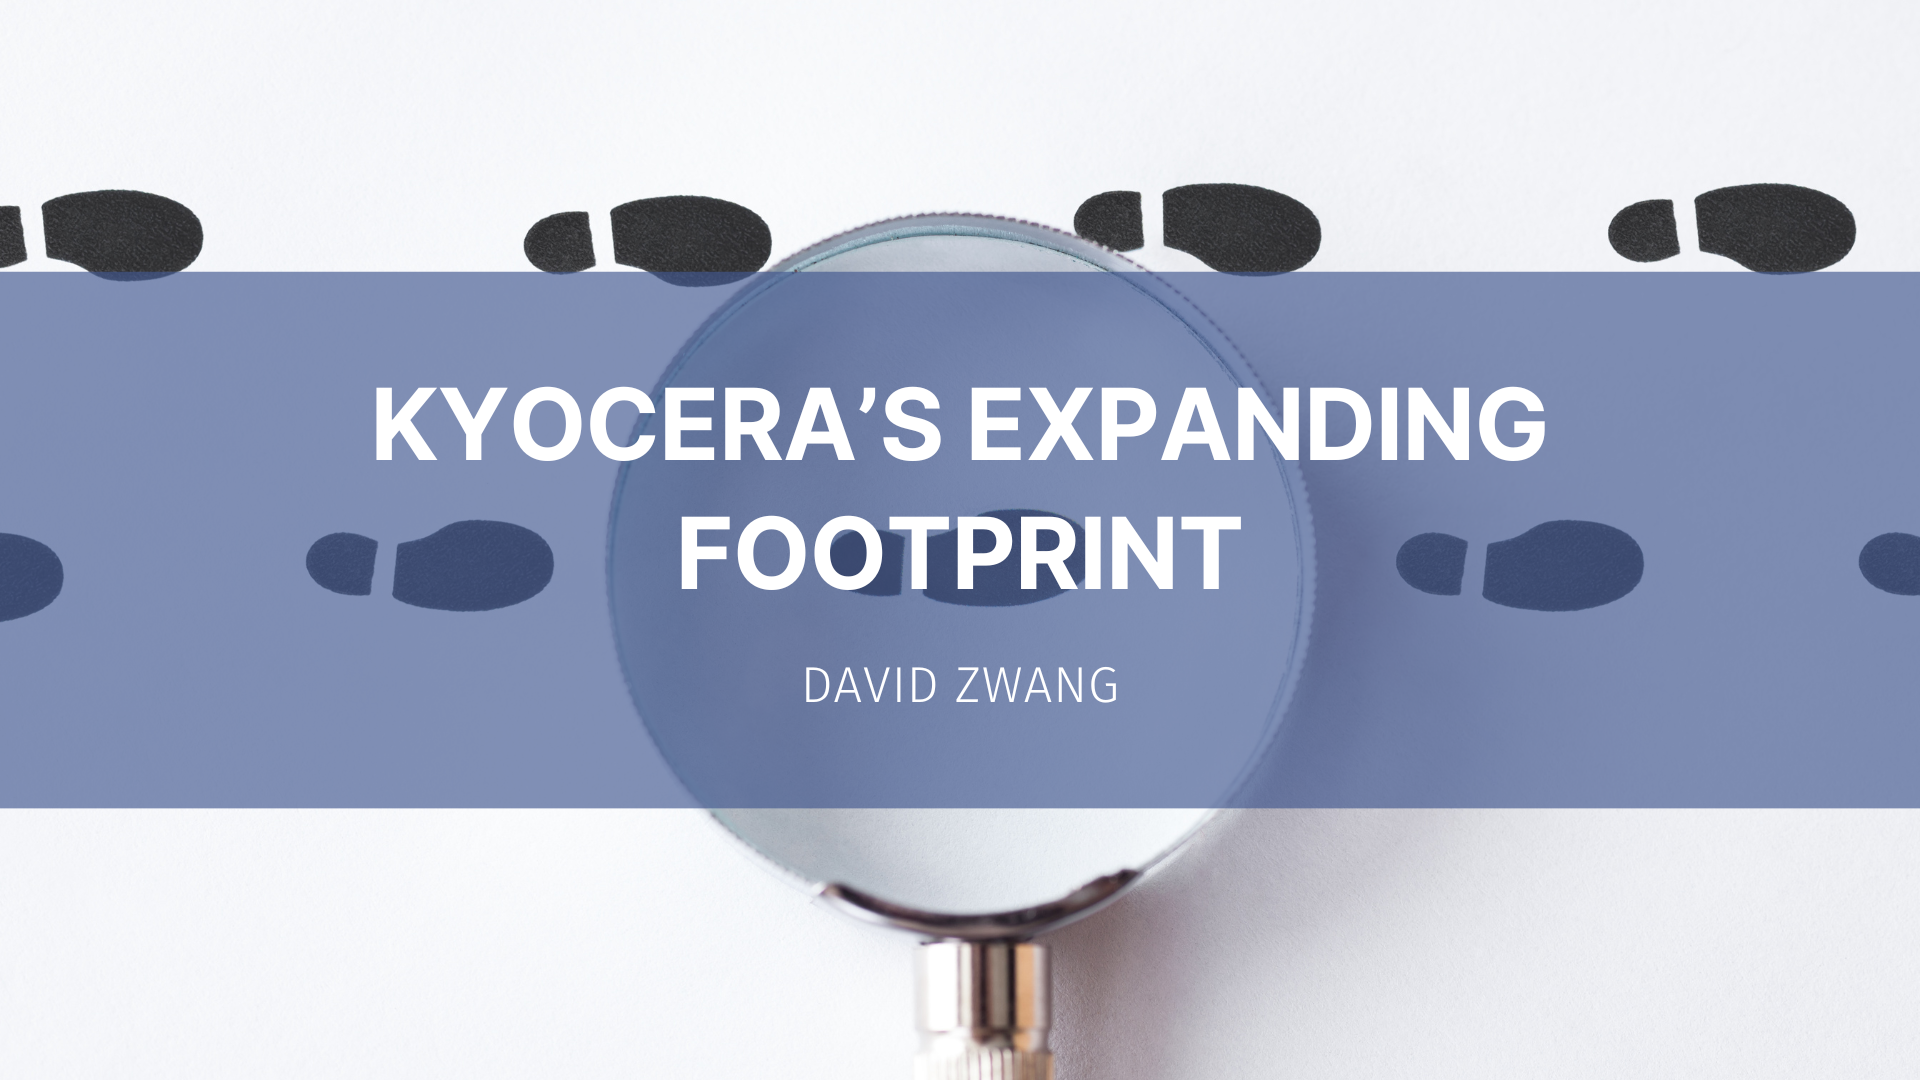 Featured image for “Kyocera’s Expanding Footprint”